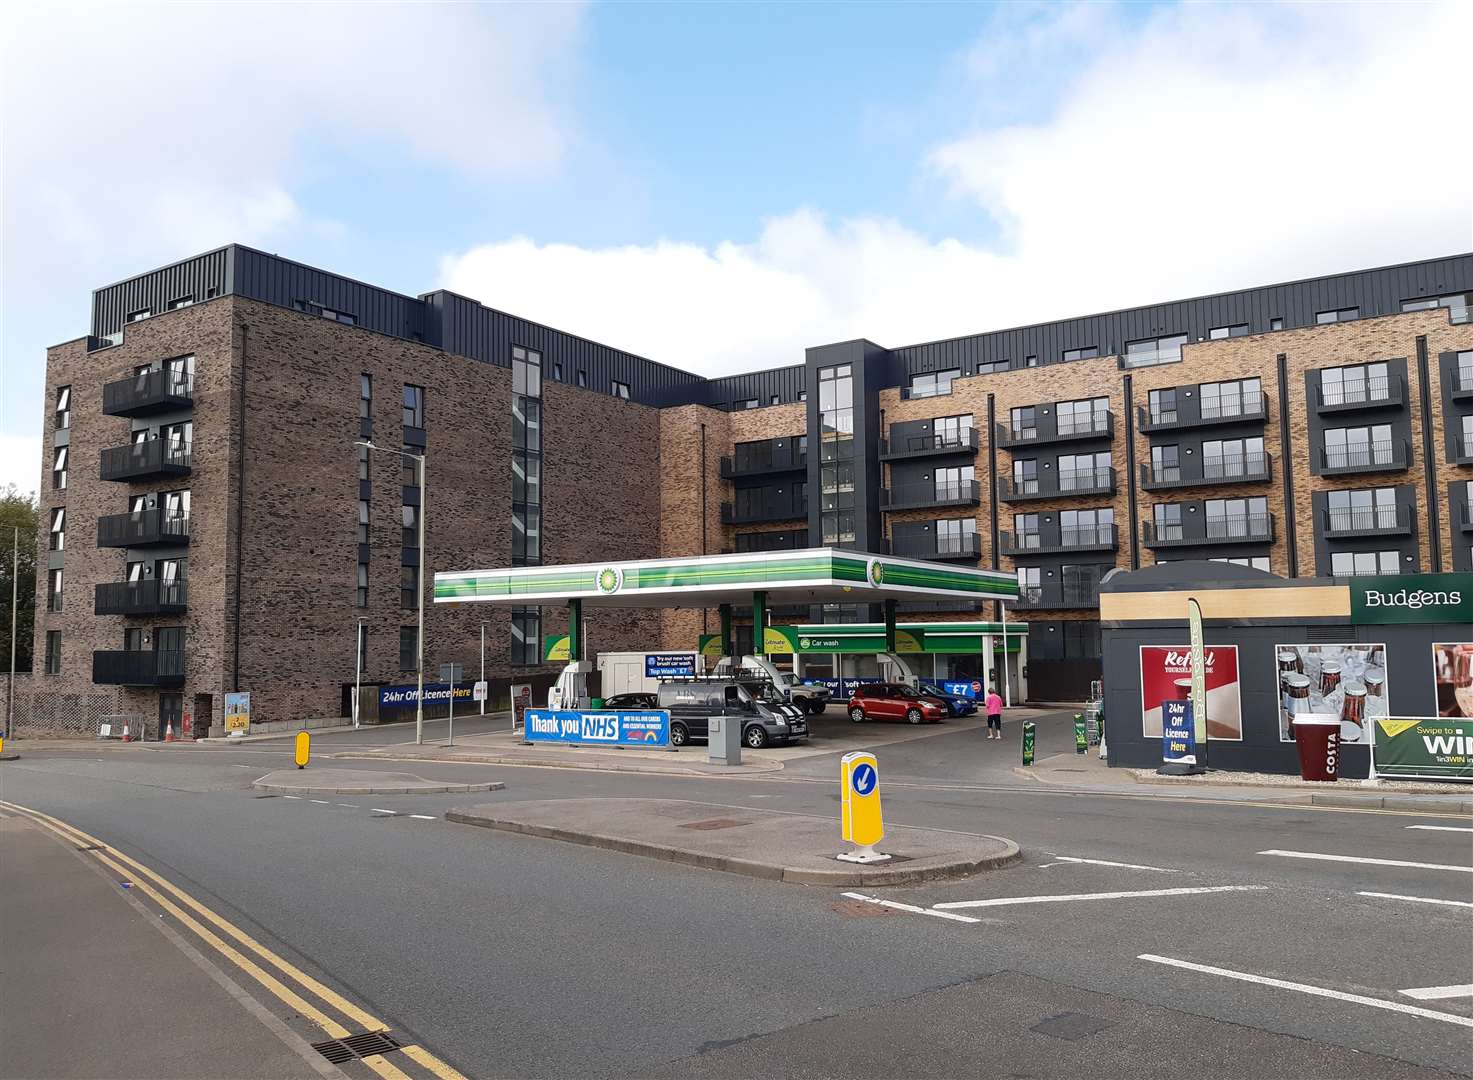 The BP petrol station in Beaver Road - next to the Hampton by Hilton - is now surrounded by 'Victoria Point' flats